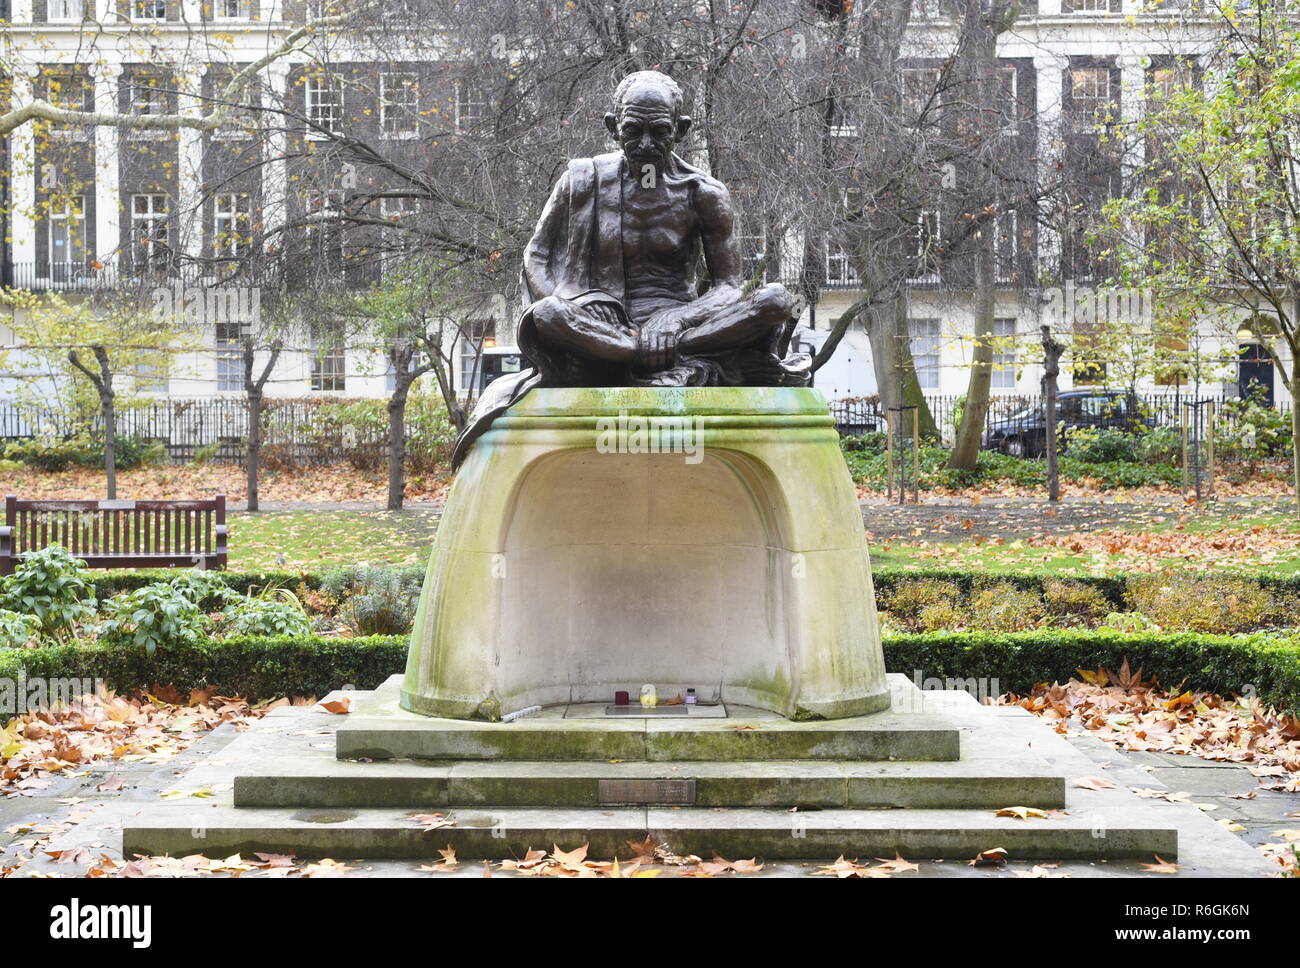 Statue of Mahatma Ghandi in Tavistock Square London. Sculpted by Fredda Brilliant and installed in 1968. The hollow pedestal was intended, and is used Stock Photo